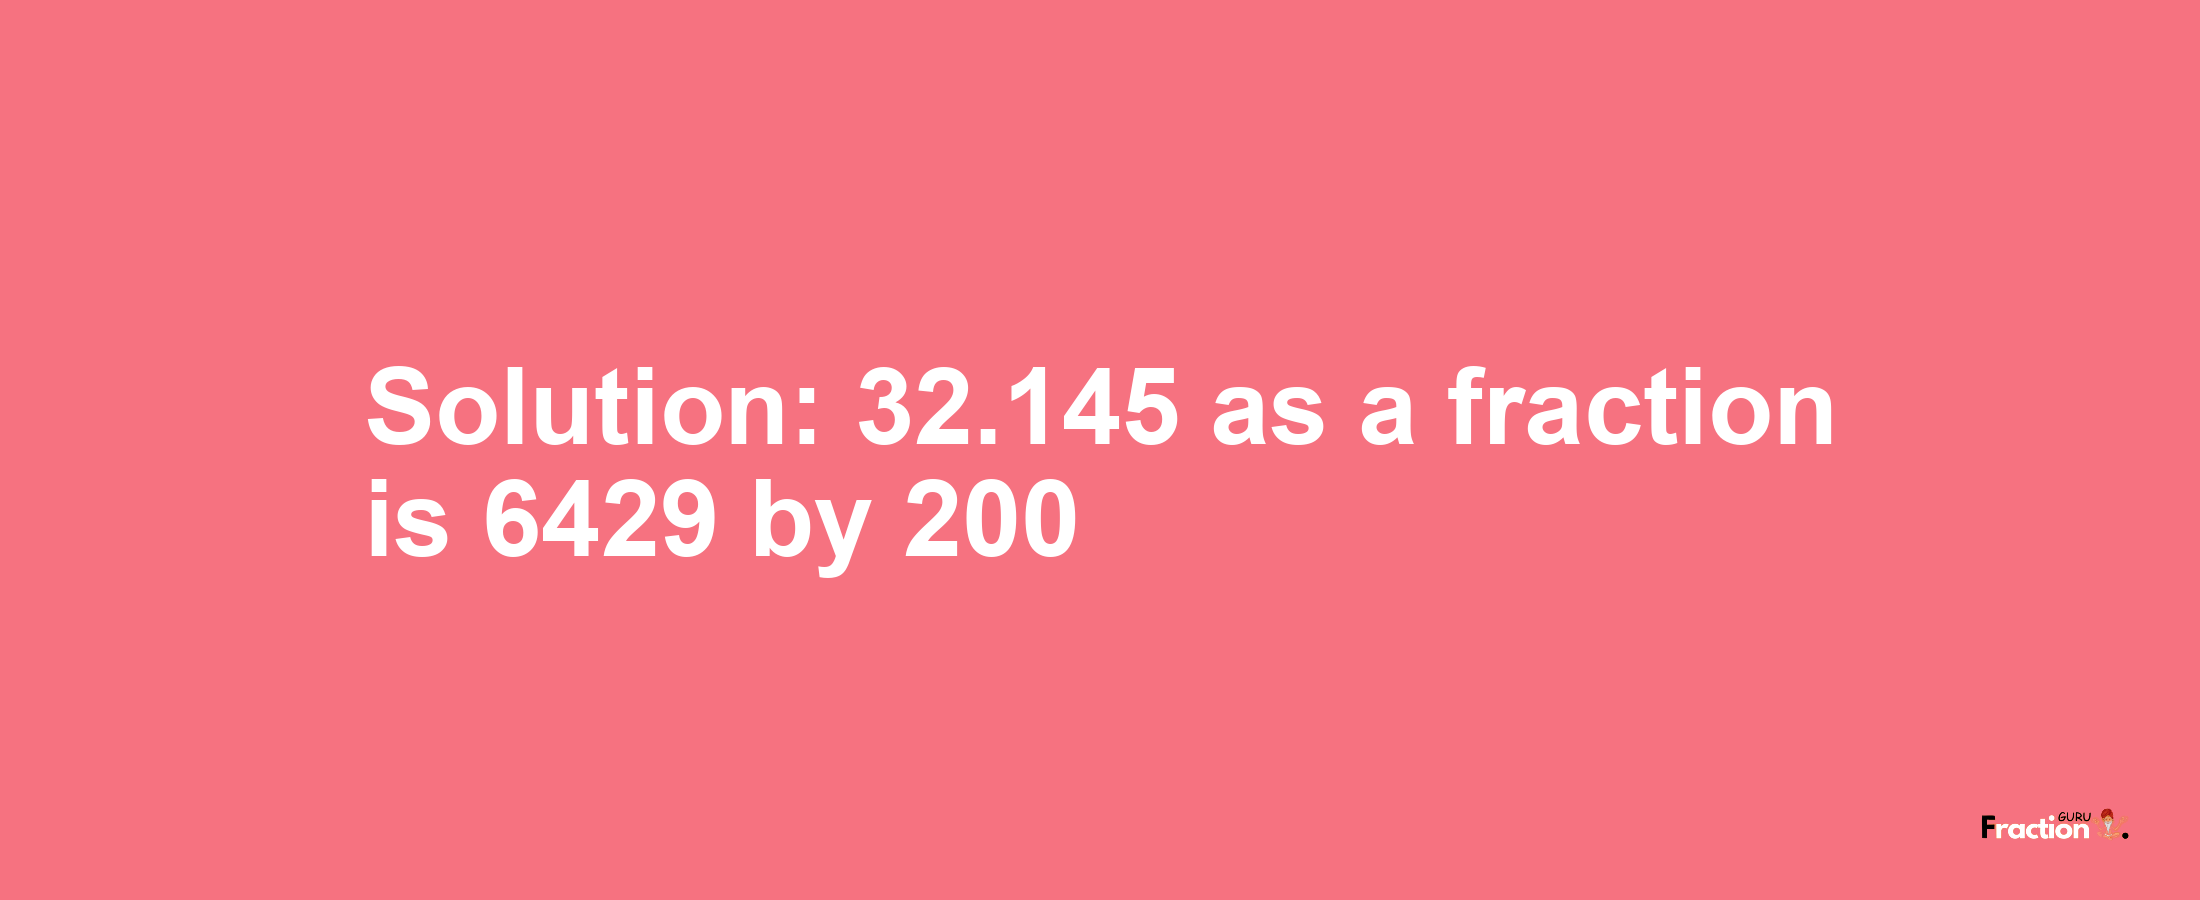 Solution:32.145 as a fraction is 6429/200